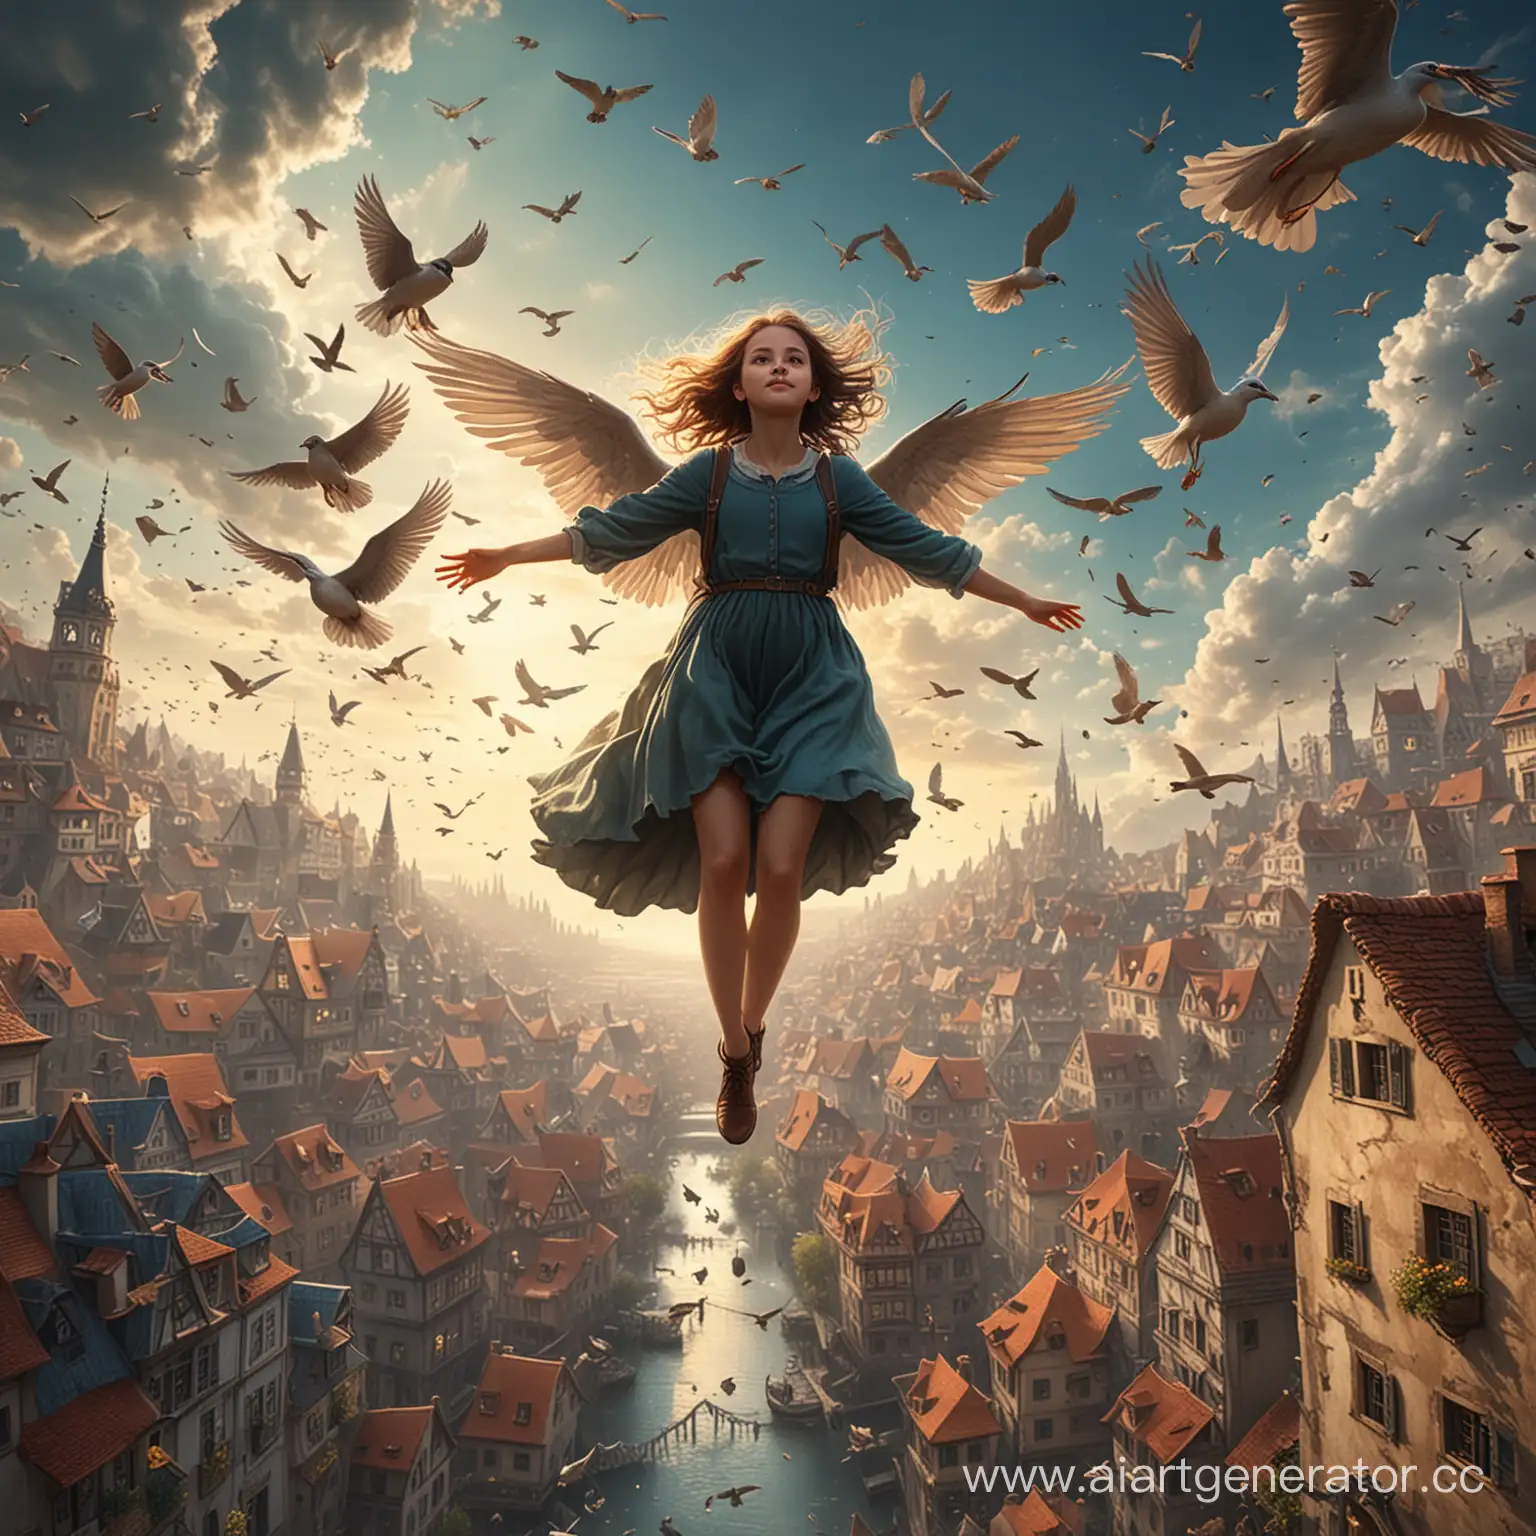 Enchanting-Flight-of-Winged-Girl-Surrounded-by-Birds-over-Fairytale-City